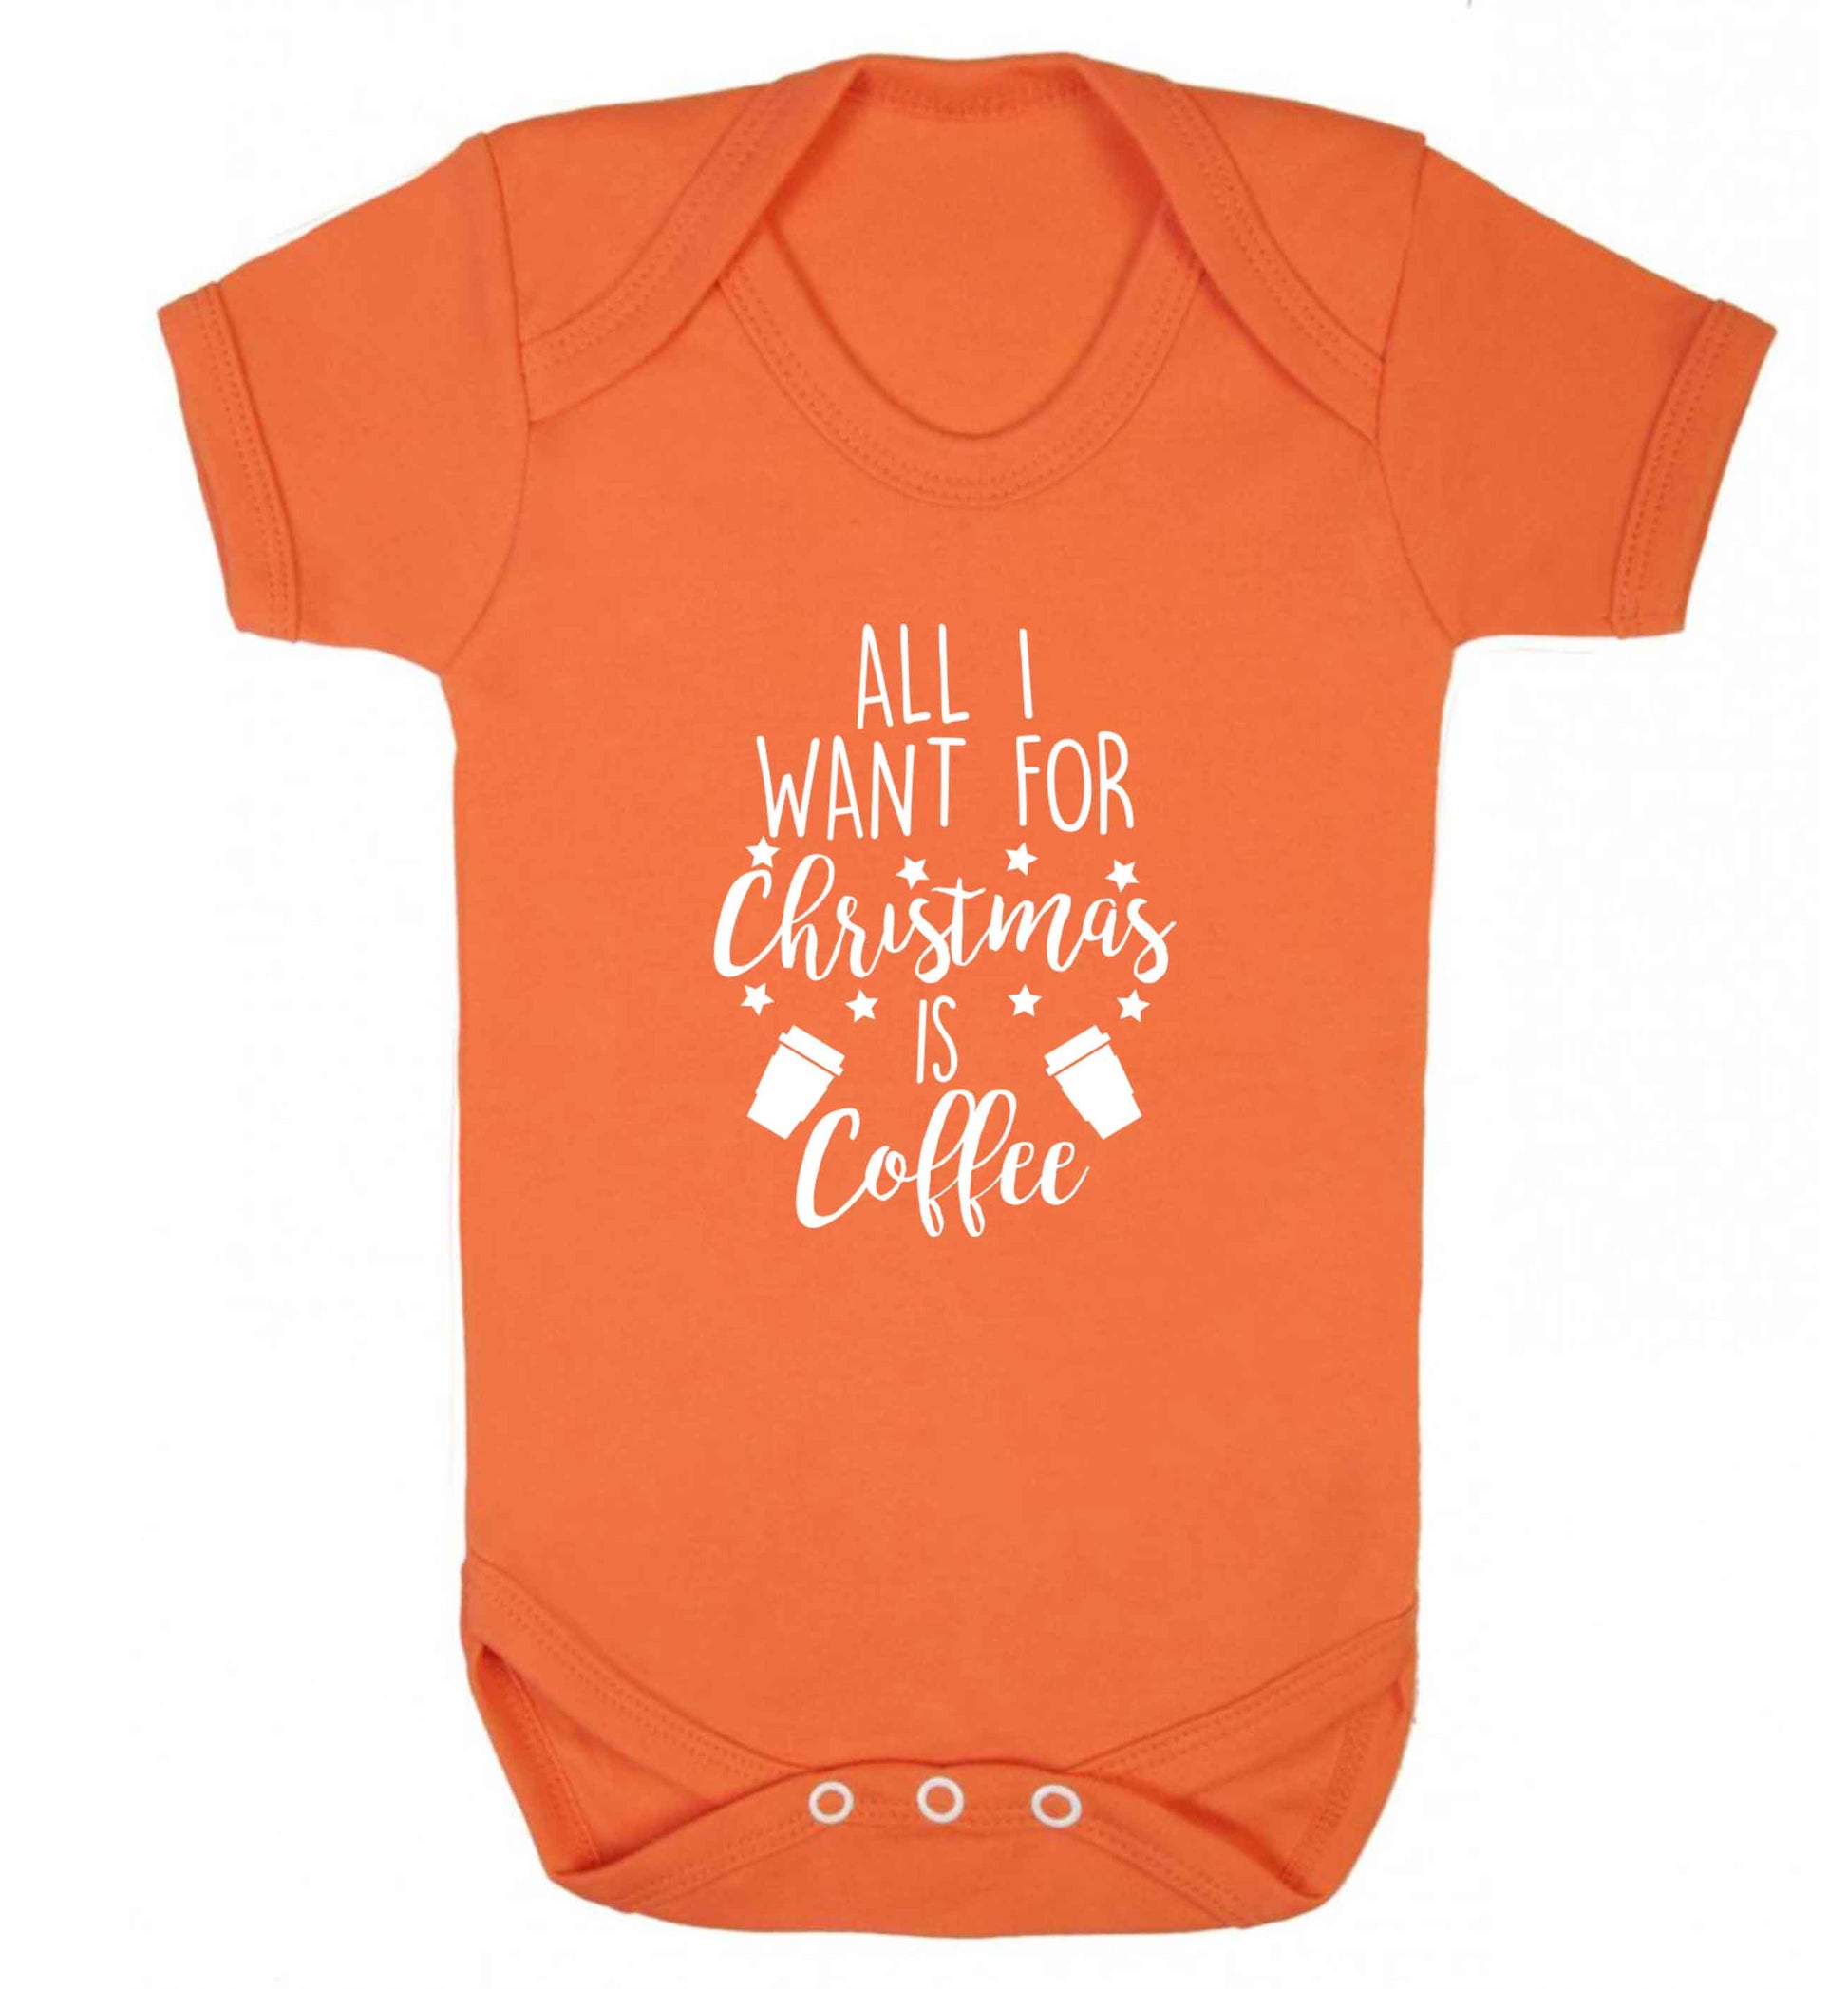 All I want for Christmas is coffee Baby Vest orange 18-24 months